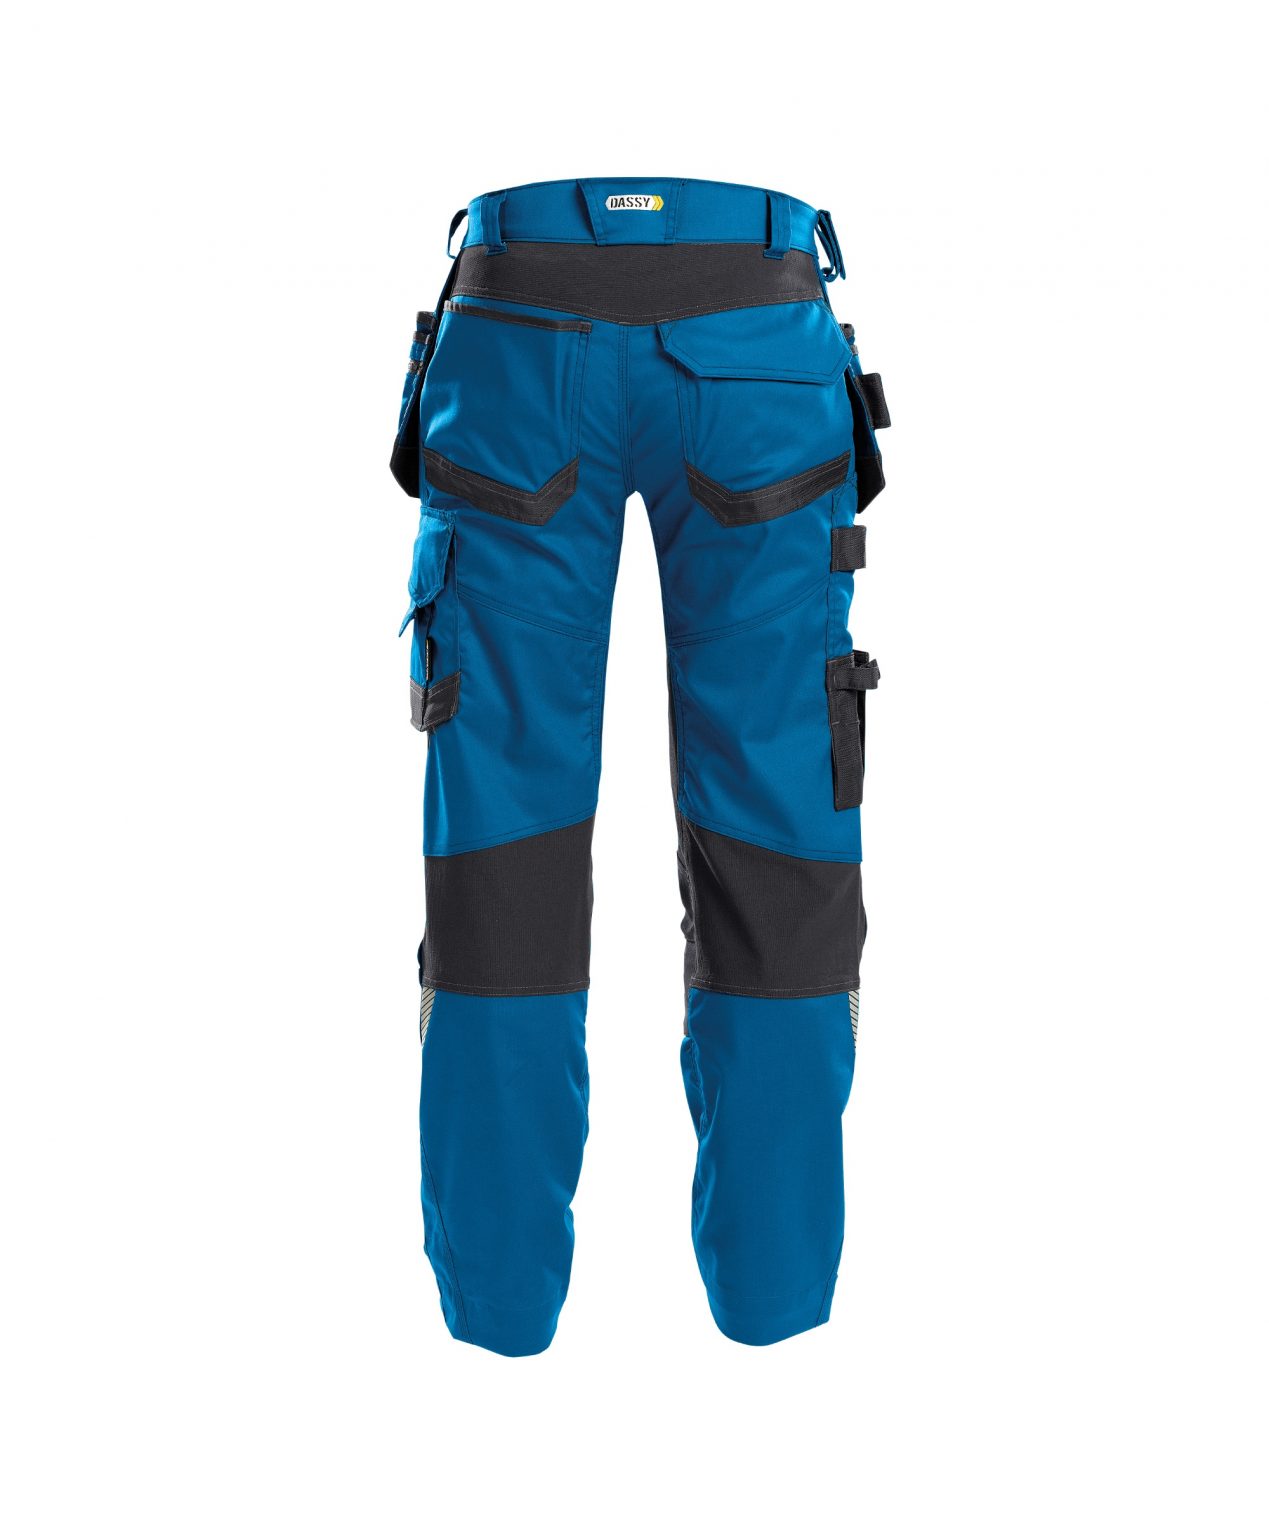 flux trousers with stretch holster and knee pockets azure blue anthracite grey back